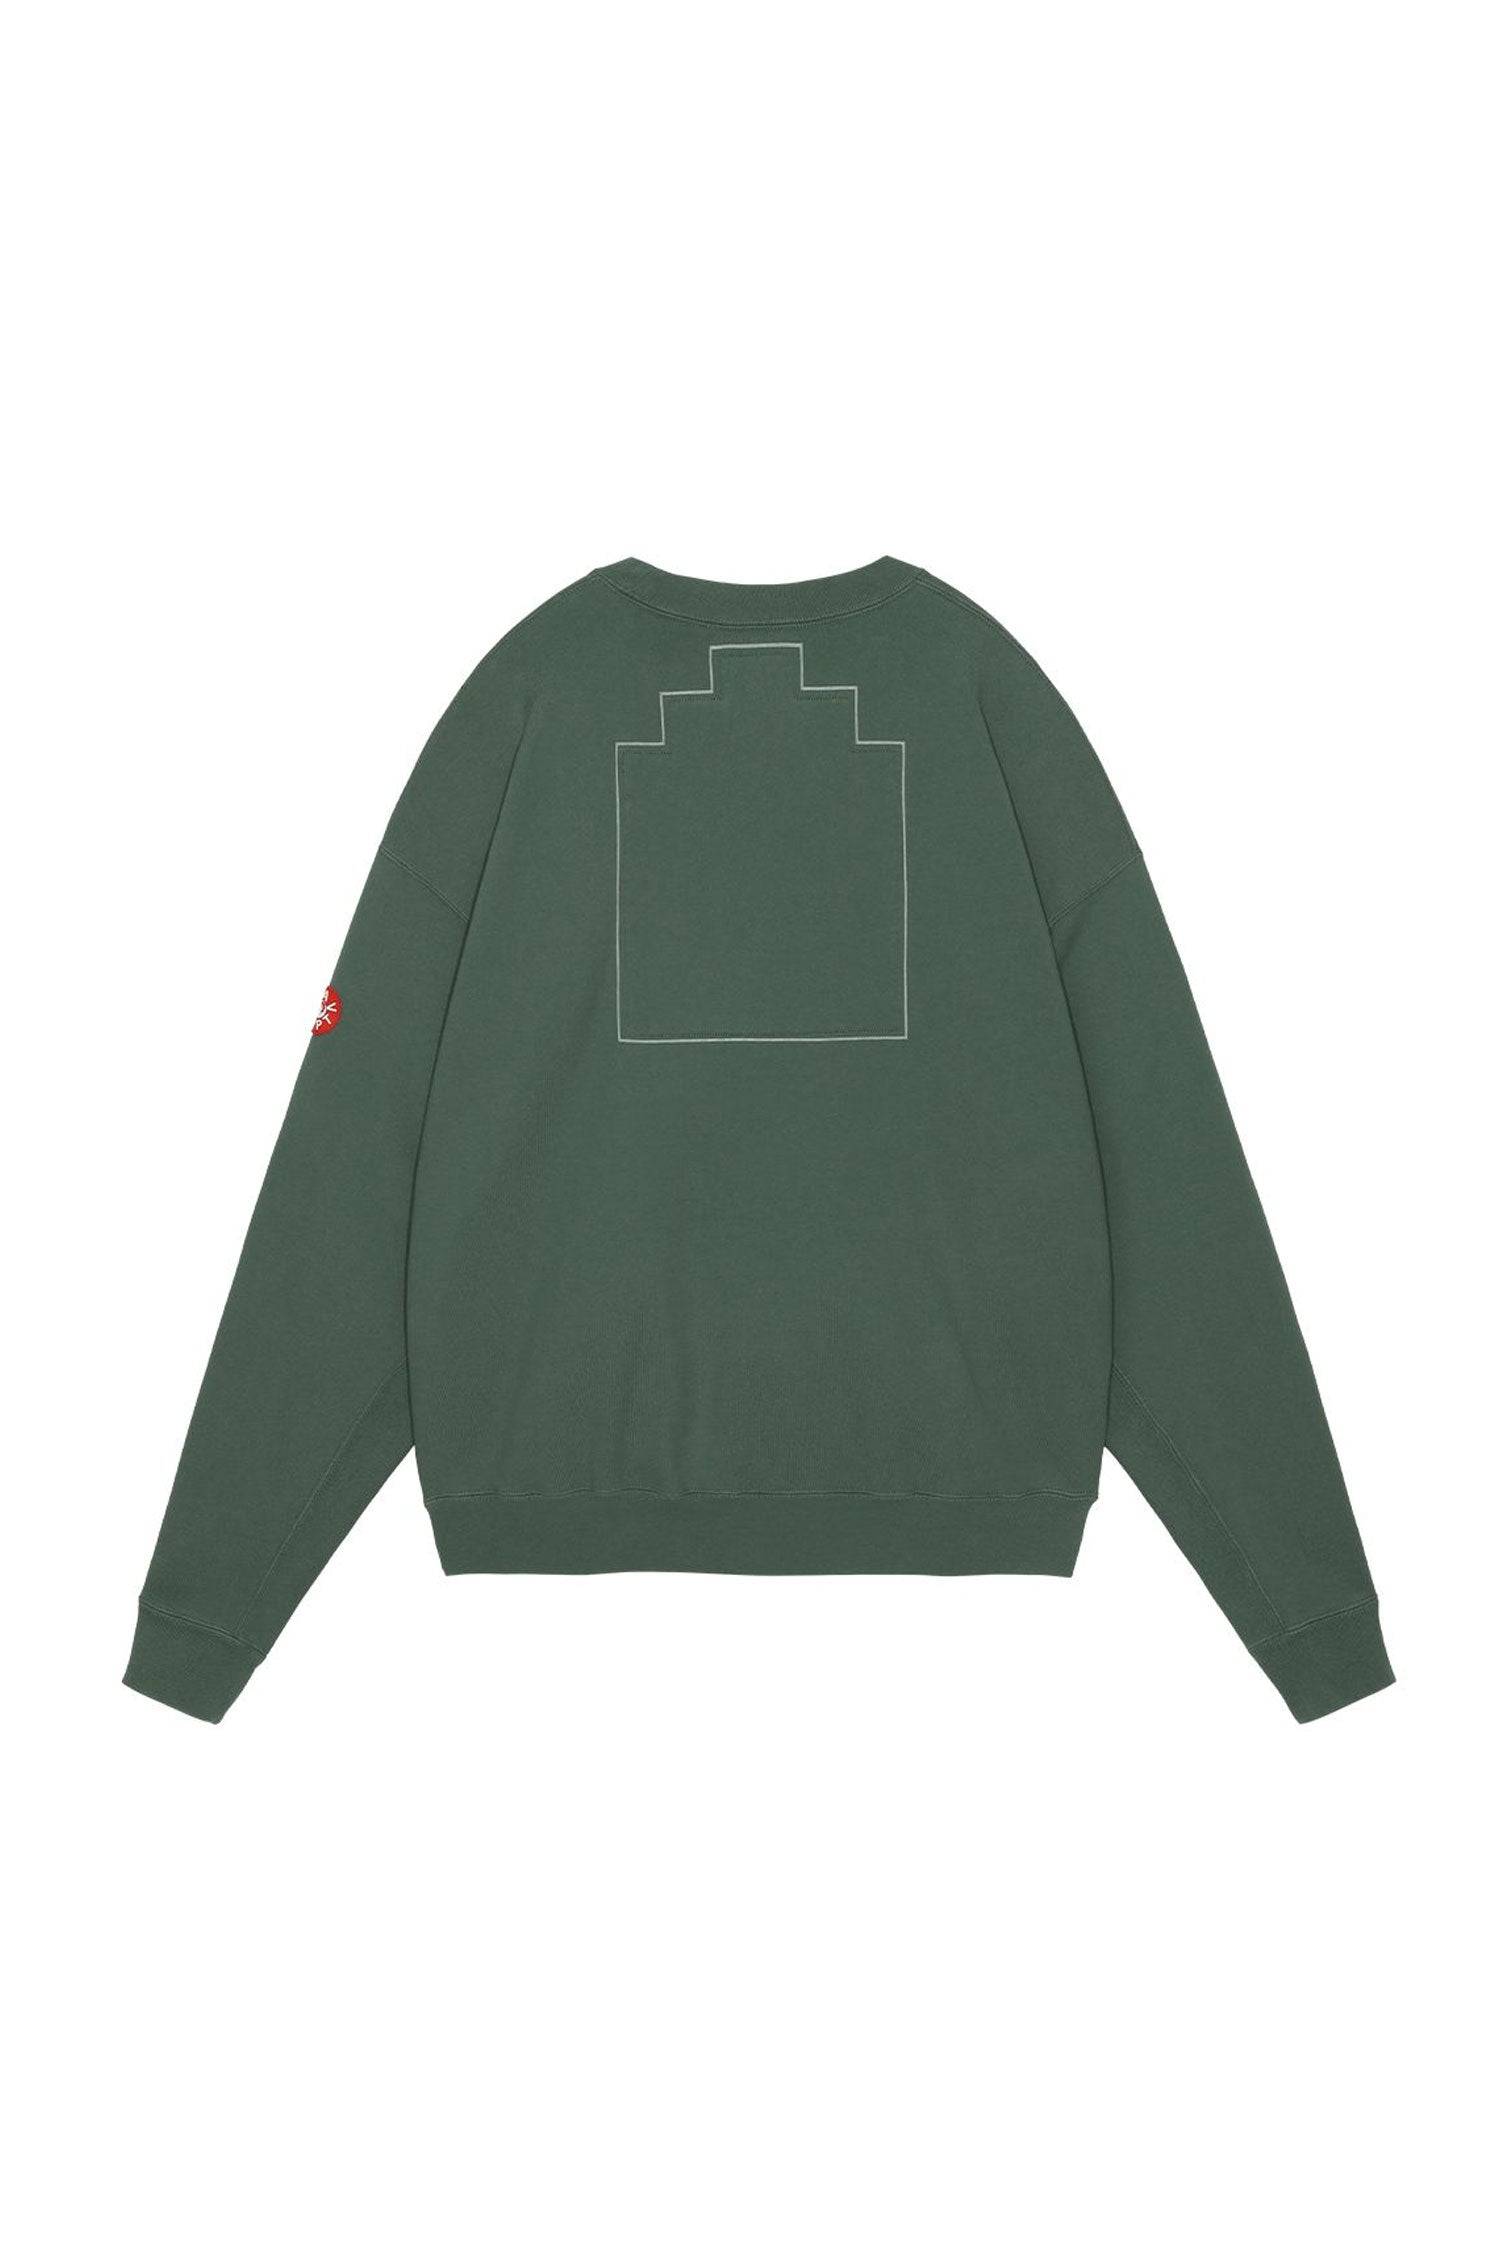 The CAV EMPT - WASHED VS 8b CREW NECK  available online with global shipping, and in PAM Stores Melbourne and Sydney.